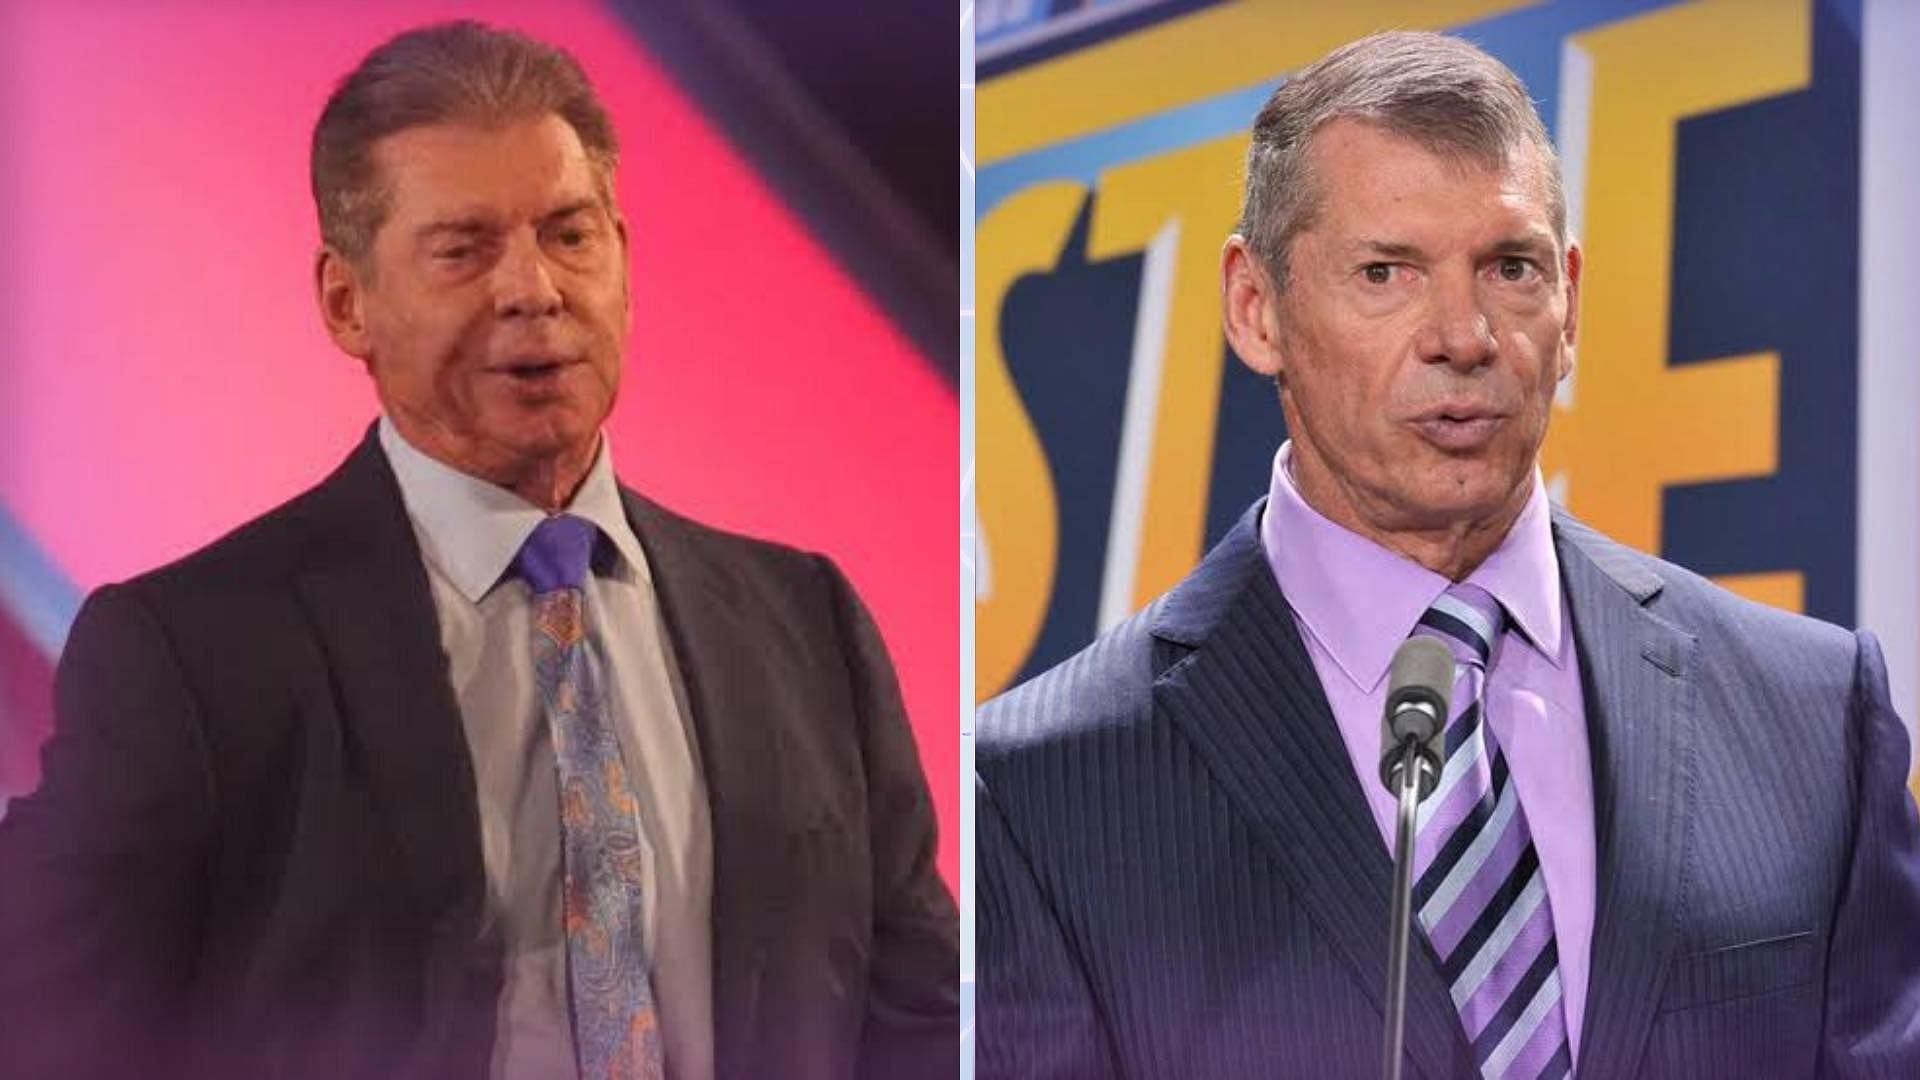 Vince McMahon is WWE